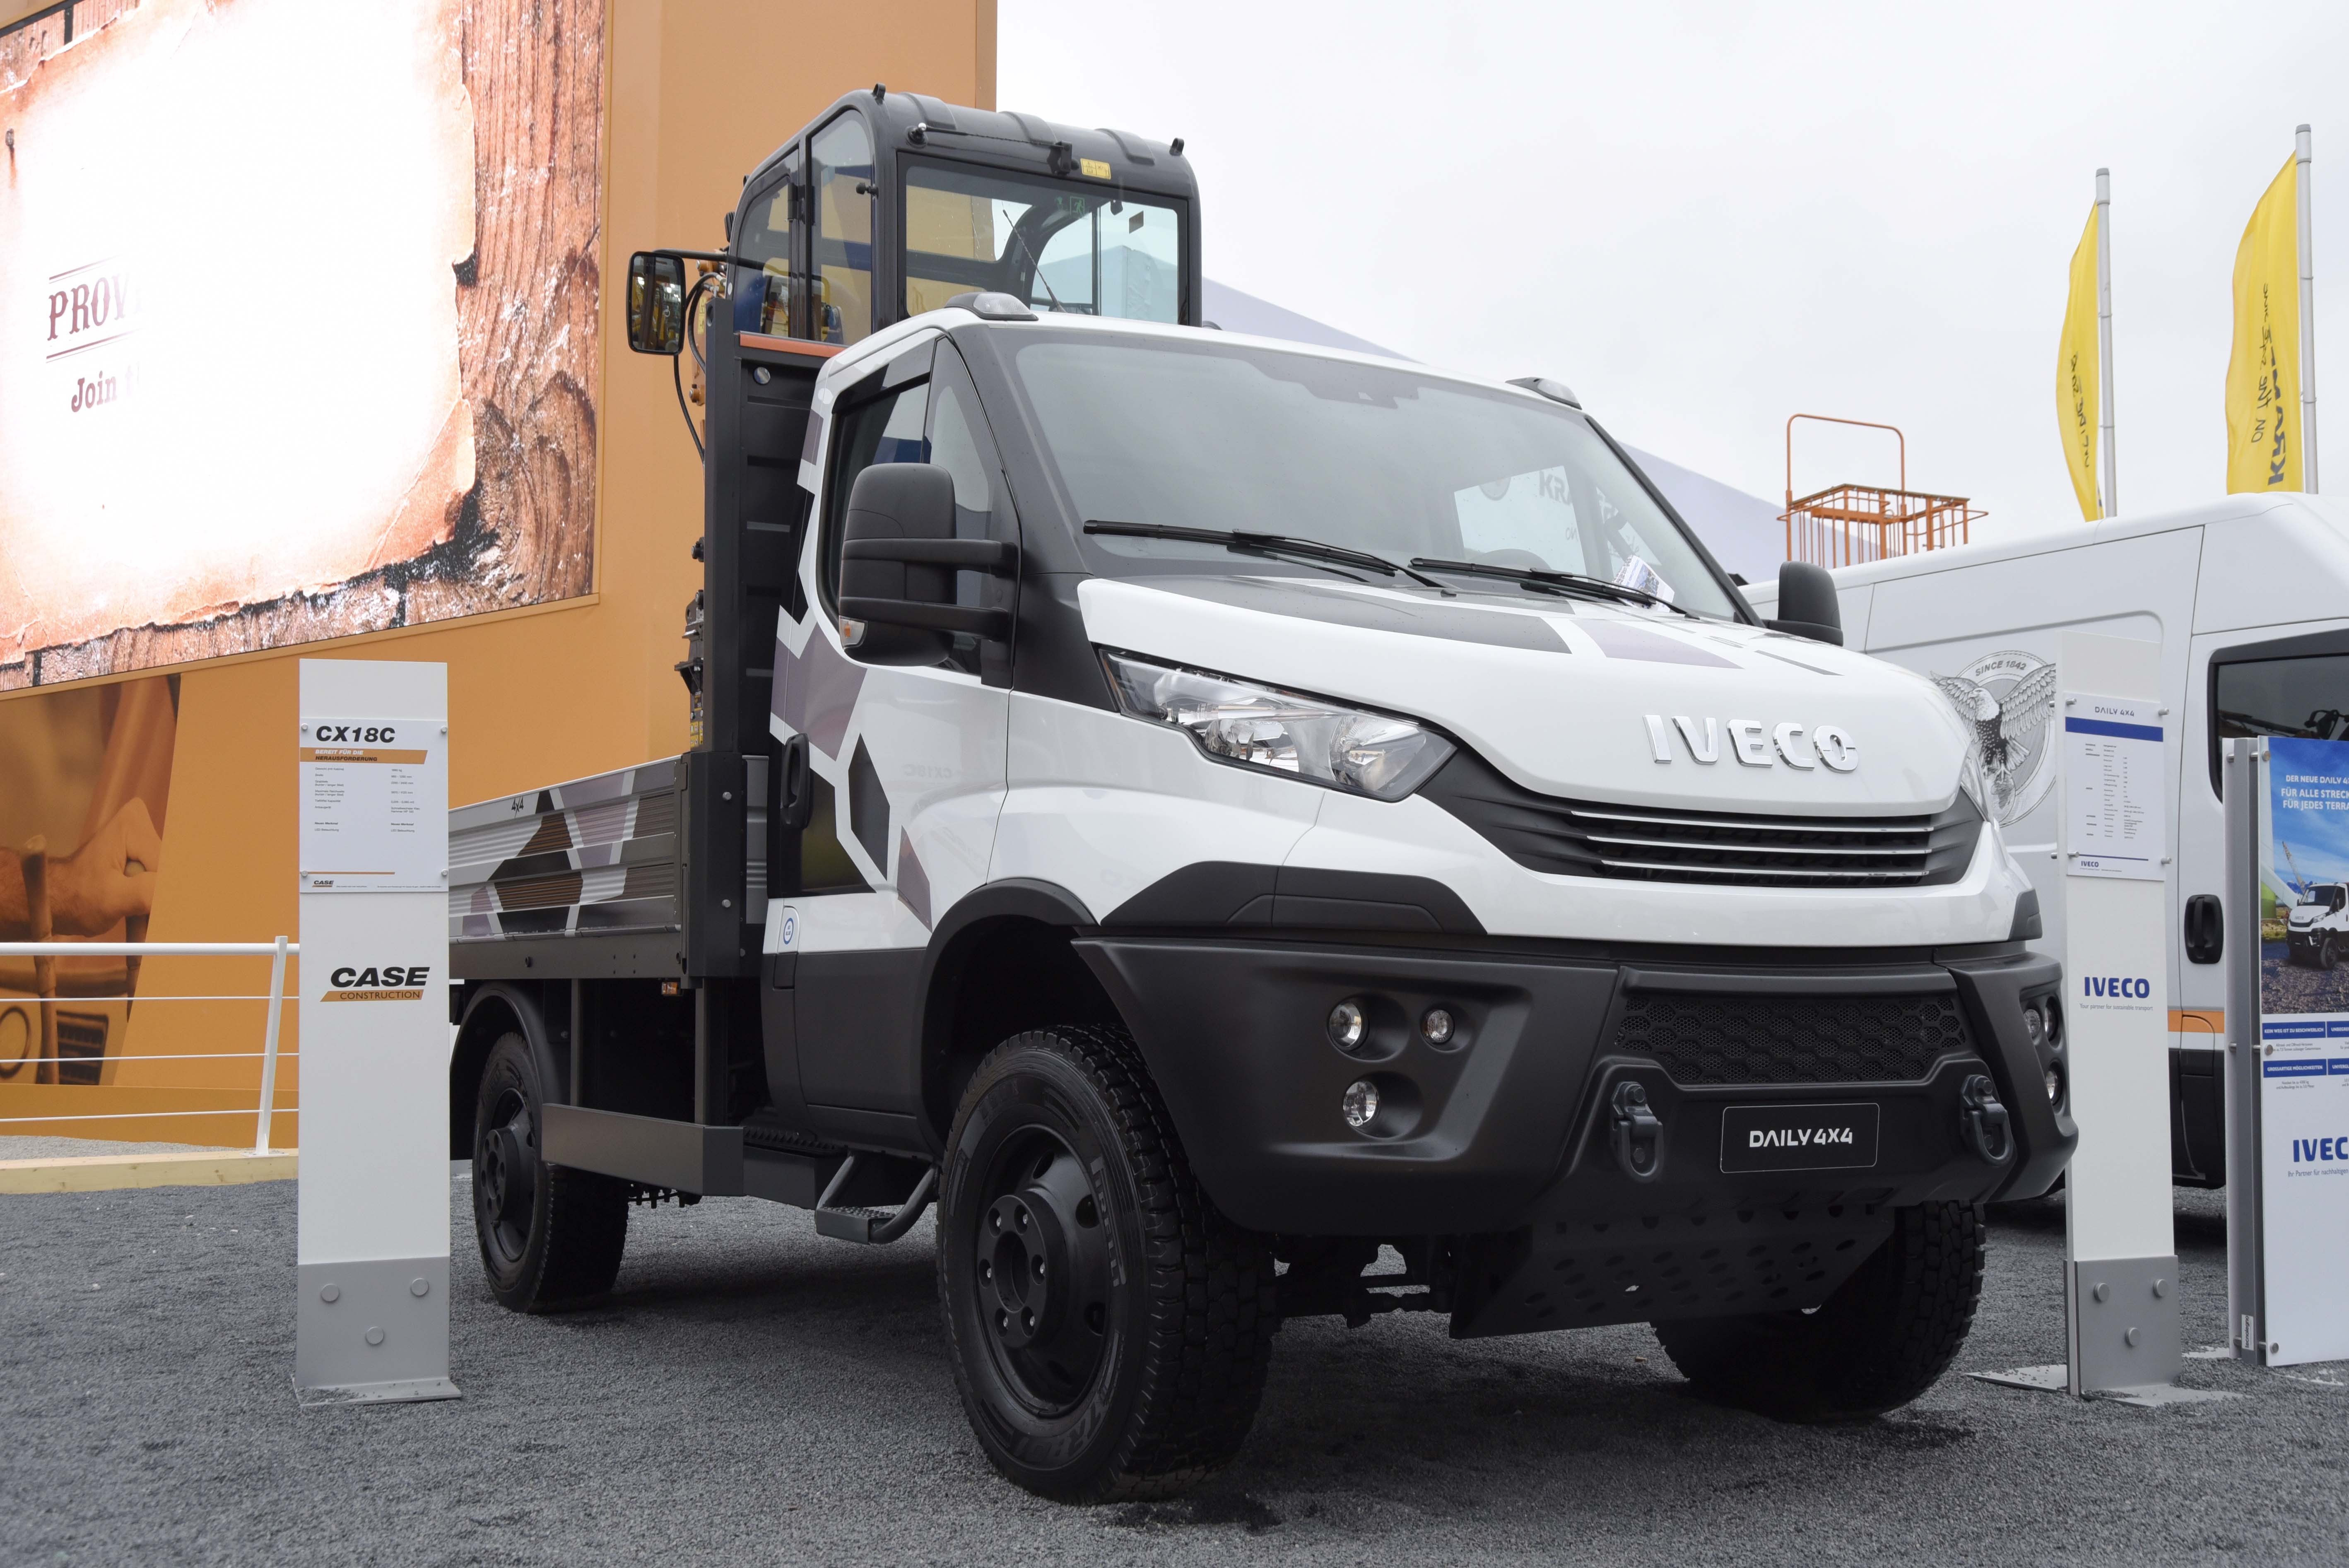 IVECO Daily 4x4.jpeg